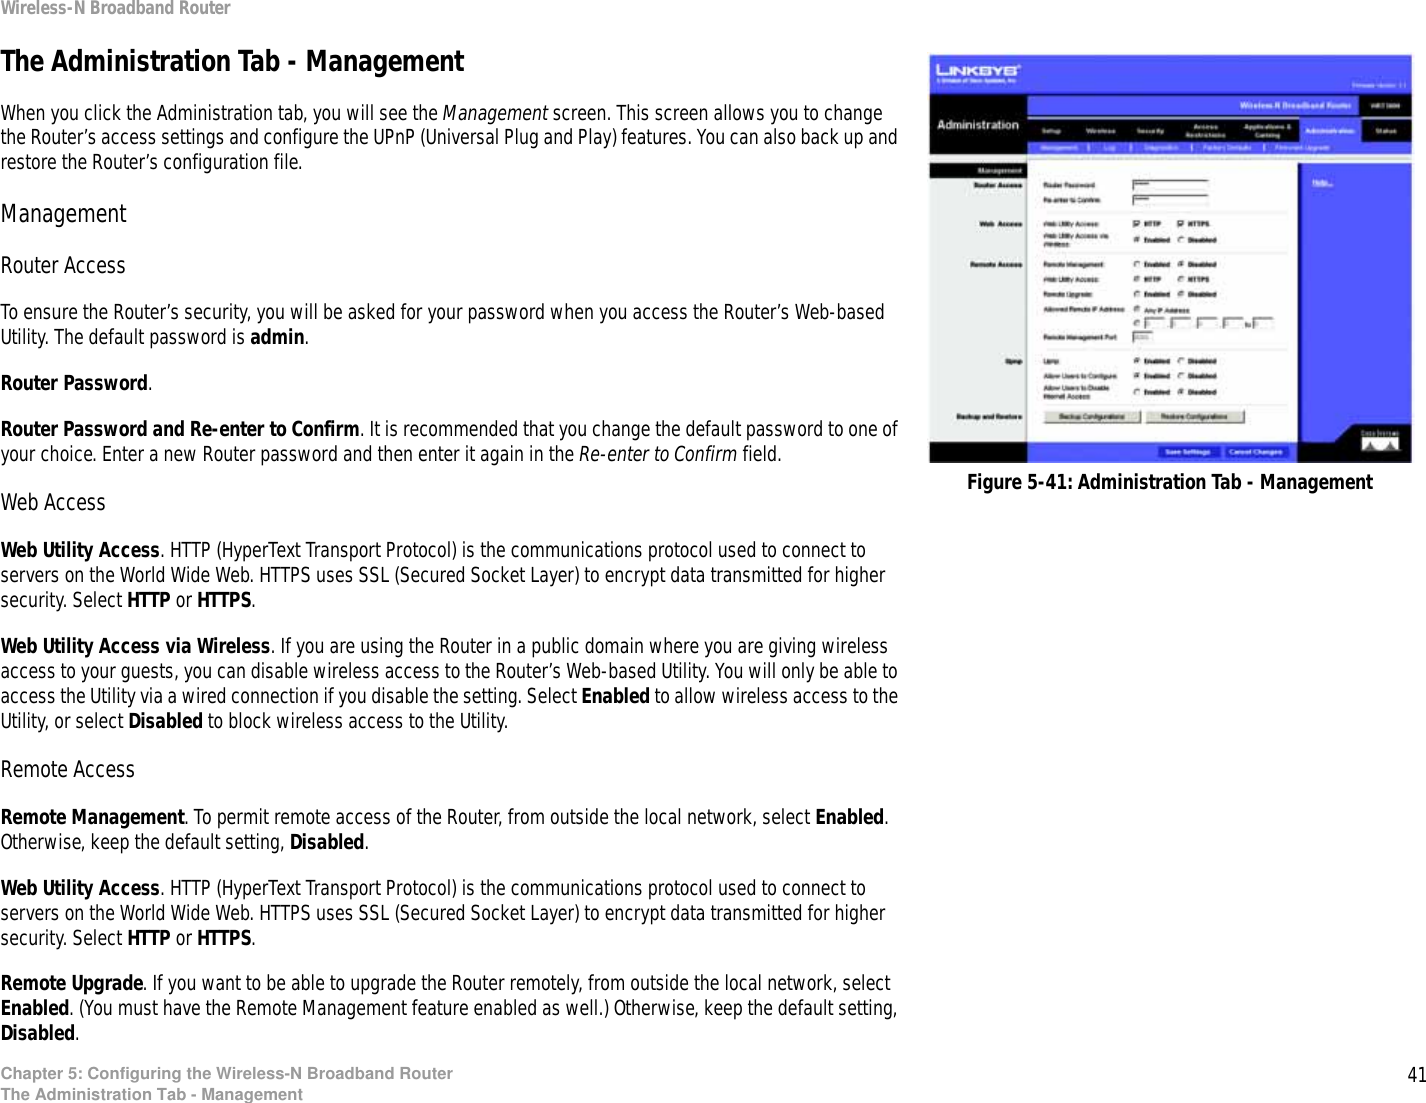 41Chapter 5: Configuring the Wireless-N Broadband RouterThe Administration Tab - ManagementWireless-N Broadband RouterThe Administration Tab - ManagementWhen you click the Administration tab, you will see the Management screen. This screen allows you to change the Router’s access settings and configure the UPnP (Universal Plug and Play) features. You can also back up and restore the Router’s configuration file.ManagementRouter AccessTo ensure the Router’s security, you will be asked for your password when you access the Router’s Web-based Utility. The default password is admin.Router Password. Router Password and Re-enter to Confirm. It is recommended that you change the default password to one of your choice. Enter a new Router password and then enter it again in the Re-enter to Confirm field.Web AccessWeb Utility Access. HTTP (HyperText Transport Protocol) is the communications protocol used to connect to servers on the World Wide Web. HTTPS uses SSL (Secured Socket Layer) to encrypt data transmitted for higher security. Select HTTP or HTTPS.Web Utility Access via Wireless. If you are using the Router in a public domain where you are giving wireless access to your guests, you can disable wireless access to the Router’s Web-based Utility. You will only be able to access the Utility via a wired connection if you disable the setting. Select Enabled to allow wireless access to the Utility, or select Disabled to block wireless access to the Utility.Remote AccessRemote Management. To permit remote access of the Router, from outside the local network, select Enabled. Otherwise, keep the default setting, Disabled.Web Utility Access. HTTP (HyperText Transport Protocol) is the communications protocol used to connect to servers on the World Wide Web. HTTPS uses SSL (Secured Socket Layer) to encrypt data transmitted for higher security. Select HTTP or HTTPS.Remote Upgrade. If you want to be able to upgrade the Router remotely, from outside the local network, select Enabled. (You must have the Remote Management feature enabled as well.) Otherwise, keep the default setting, Disabled.Figure 5-41: Administration Tab - Management